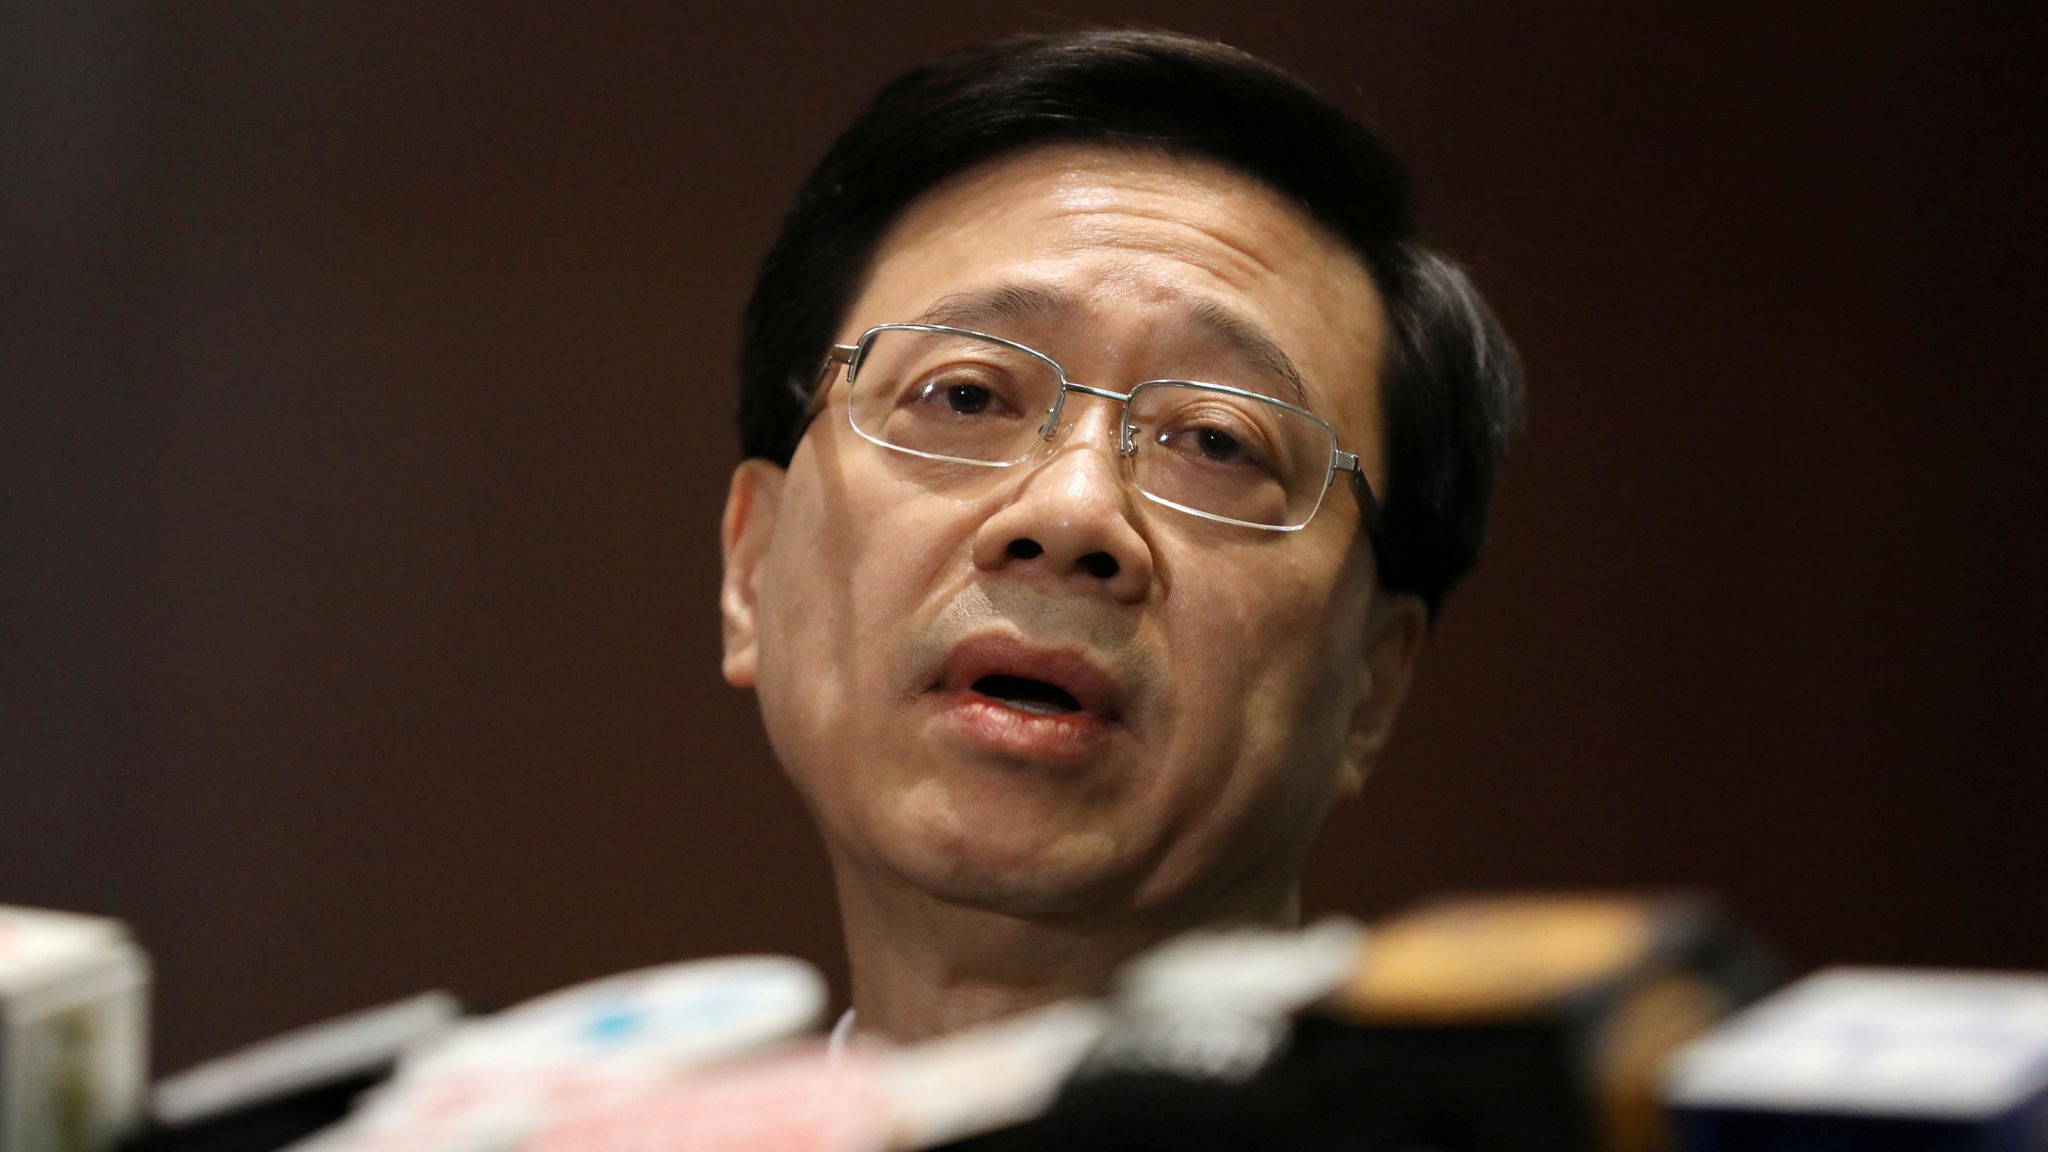 John Lee is Hong Kong's new chief executive - who is he and why are  pro-democracy activists concerned? | World News | Sky News